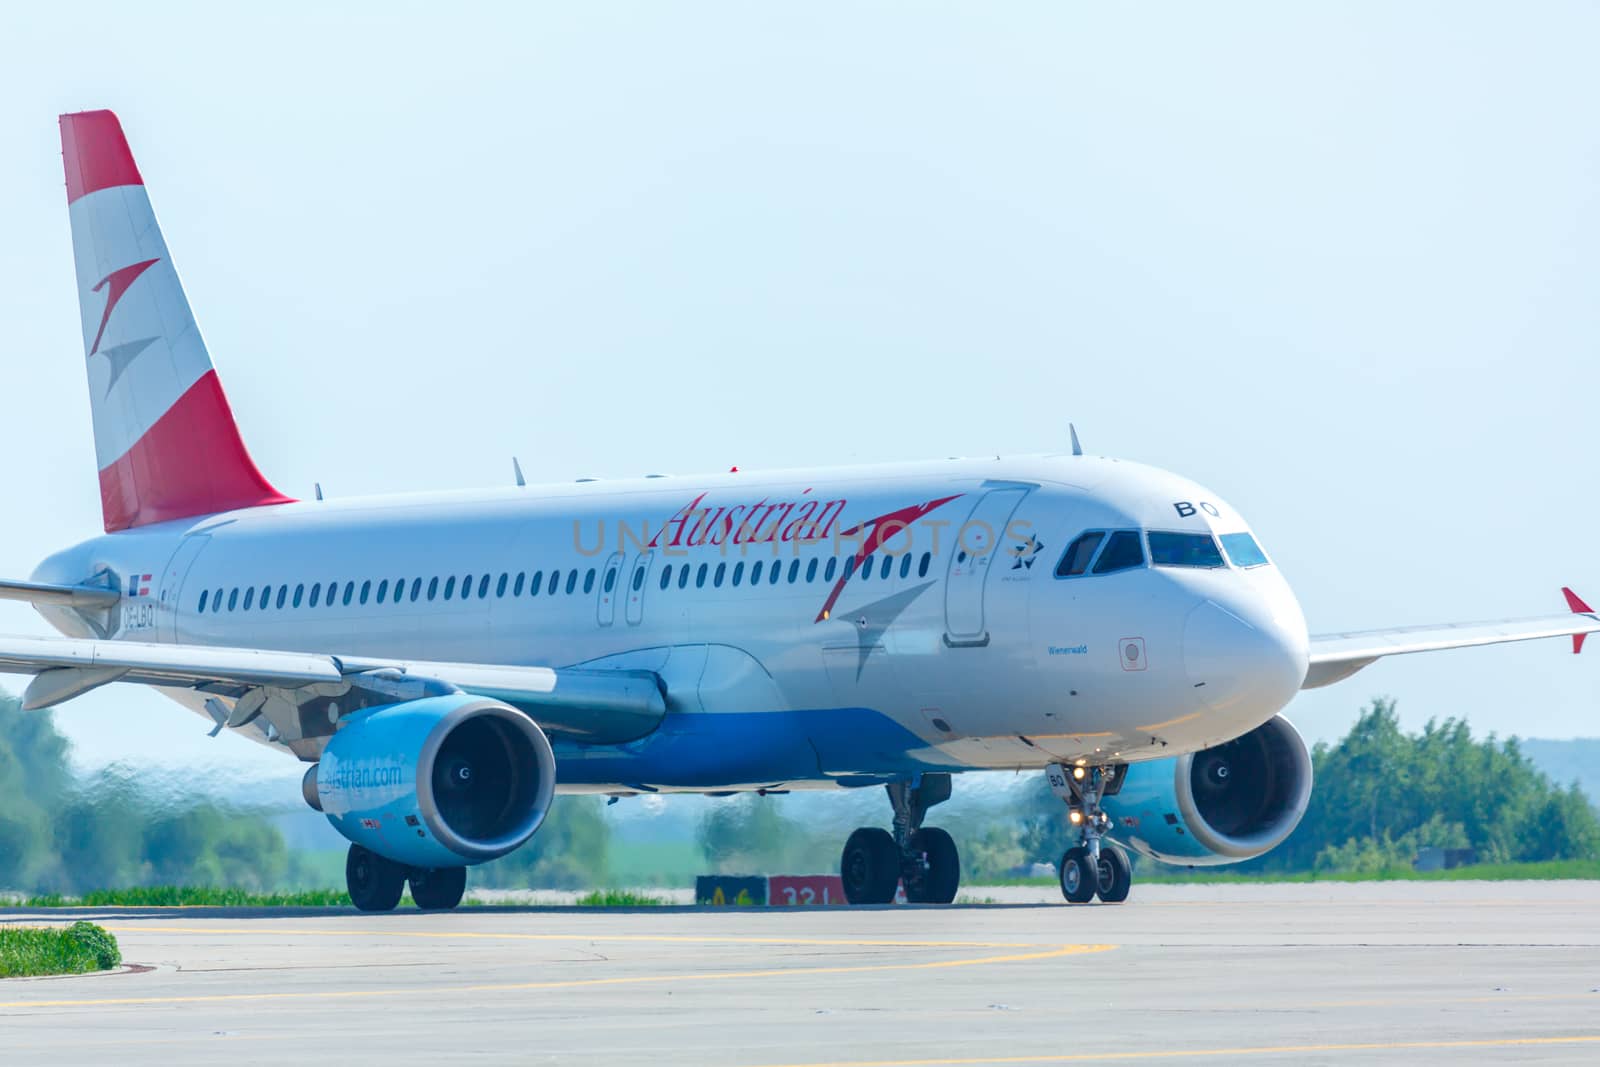 MOSCOW, RUSSIAN FEDERATION - MAY 26, 2015: Austrian Airbus 320 taxiing on the runway before take-off. Oficial spotting in Domodedovo airport (DME) on May 26, Moscow, Russian Federation